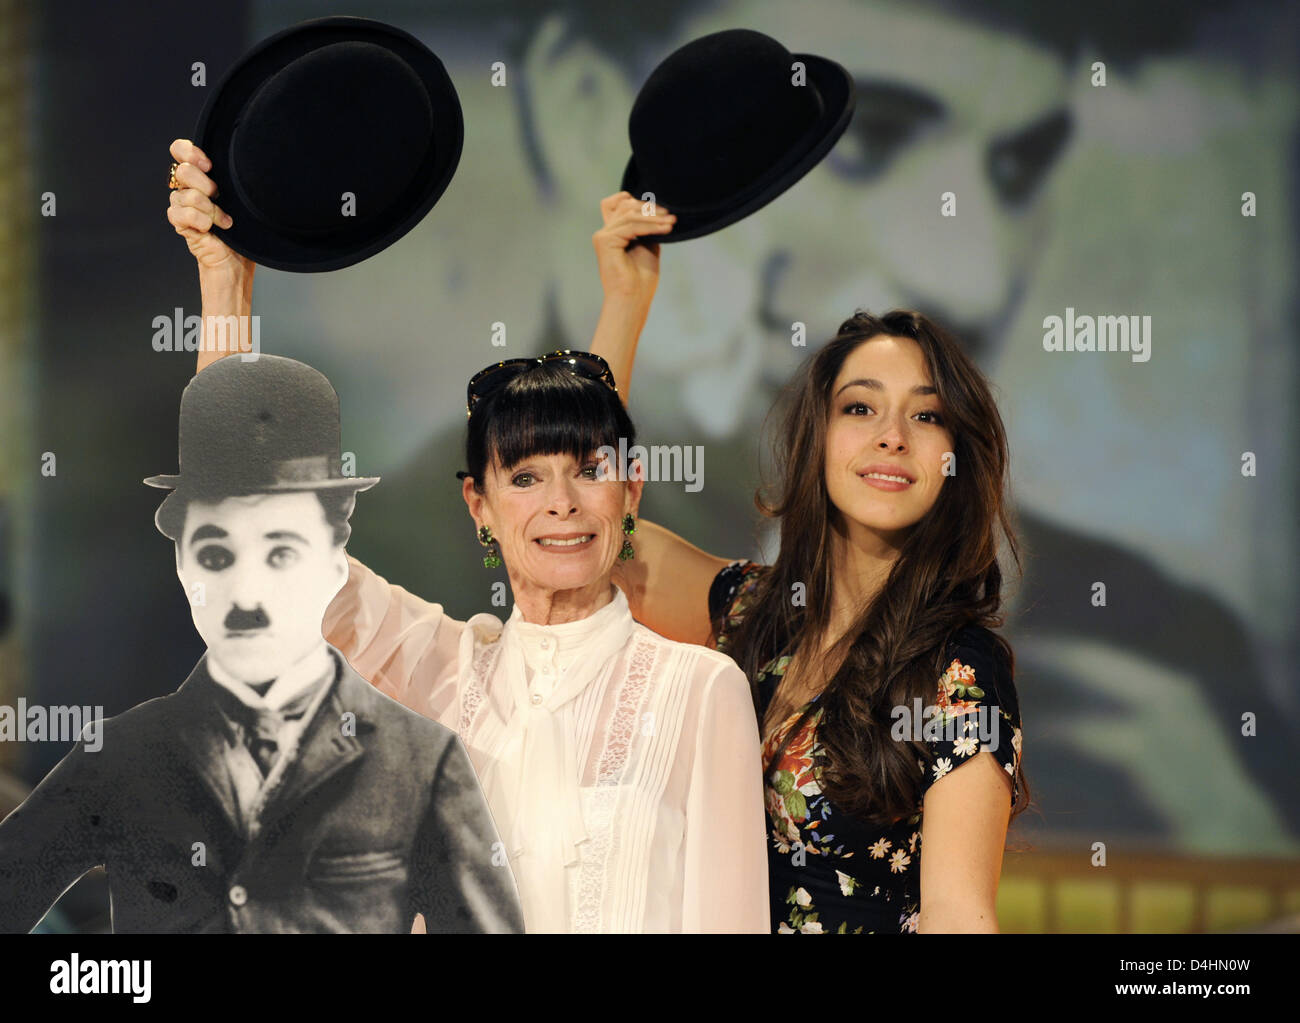 Oona Chaplin High Resolution Stock Photography and Images - Alamy